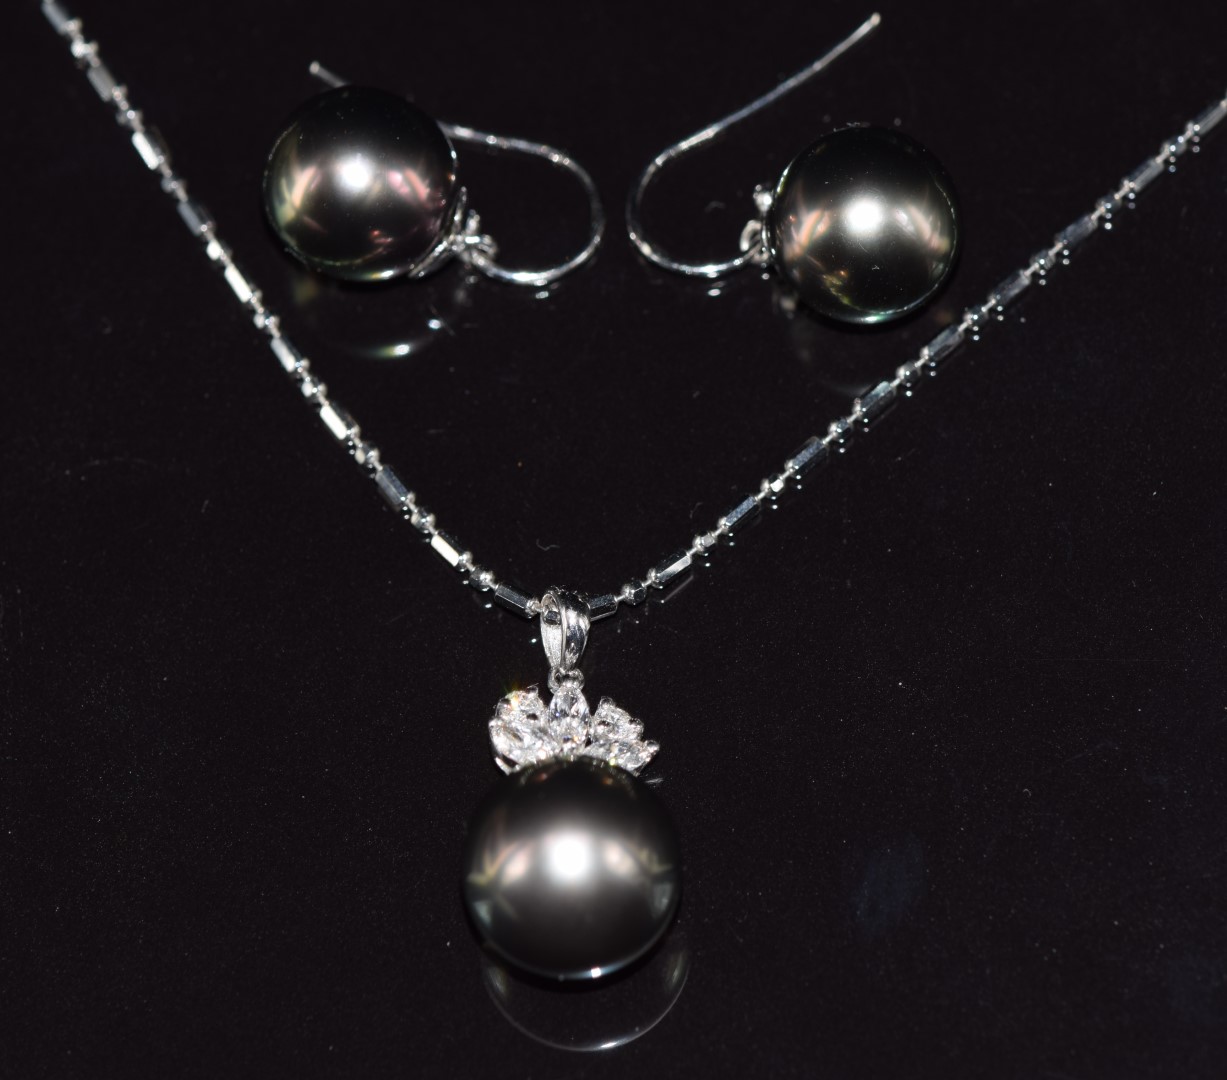 An 18ct white gold pendant set with a 13ct black South Sea pearl, three marquise cut diamonds and